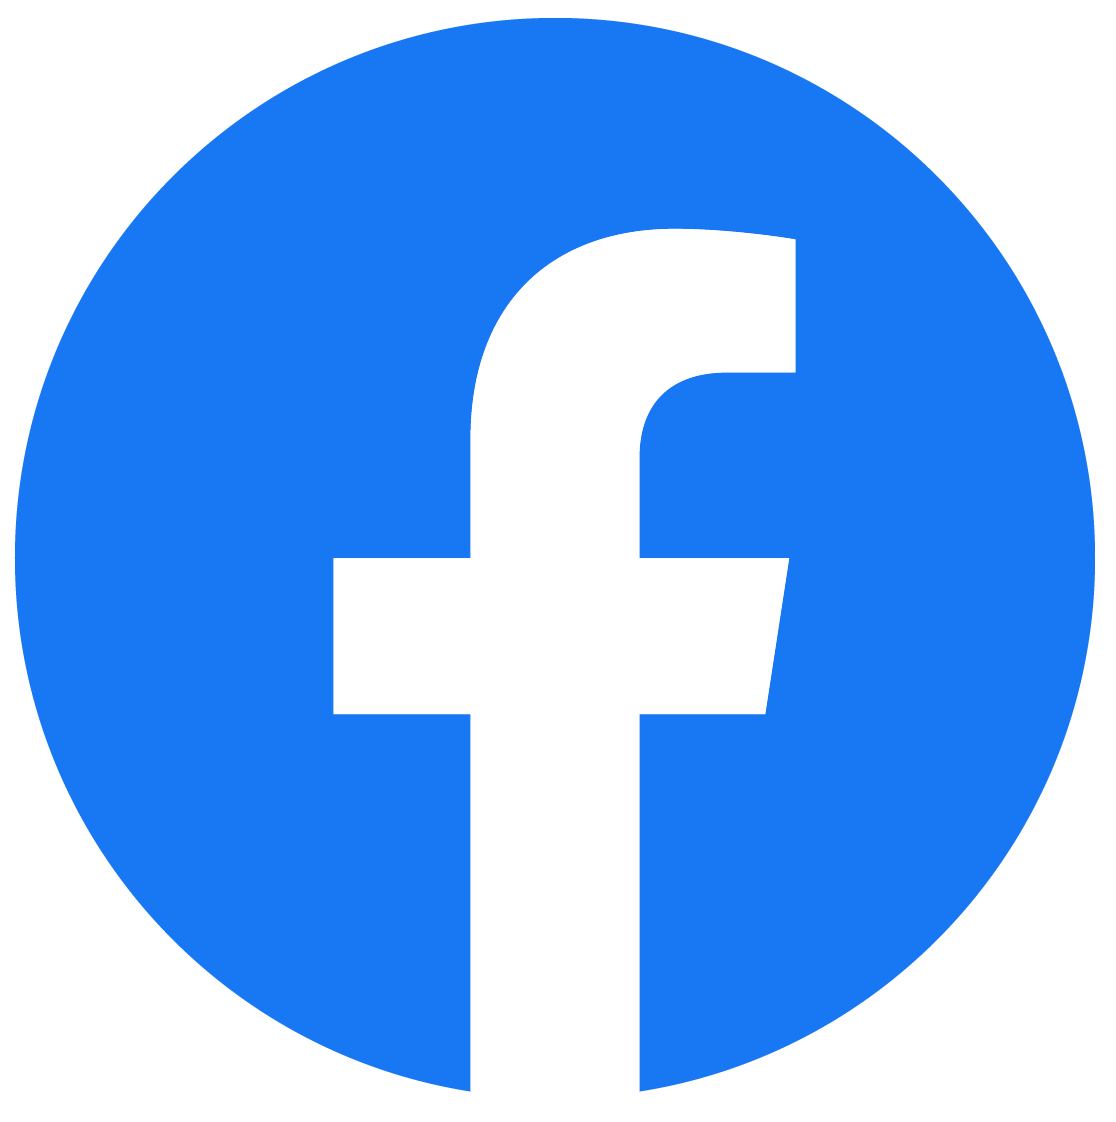 Facebook_Icon.png